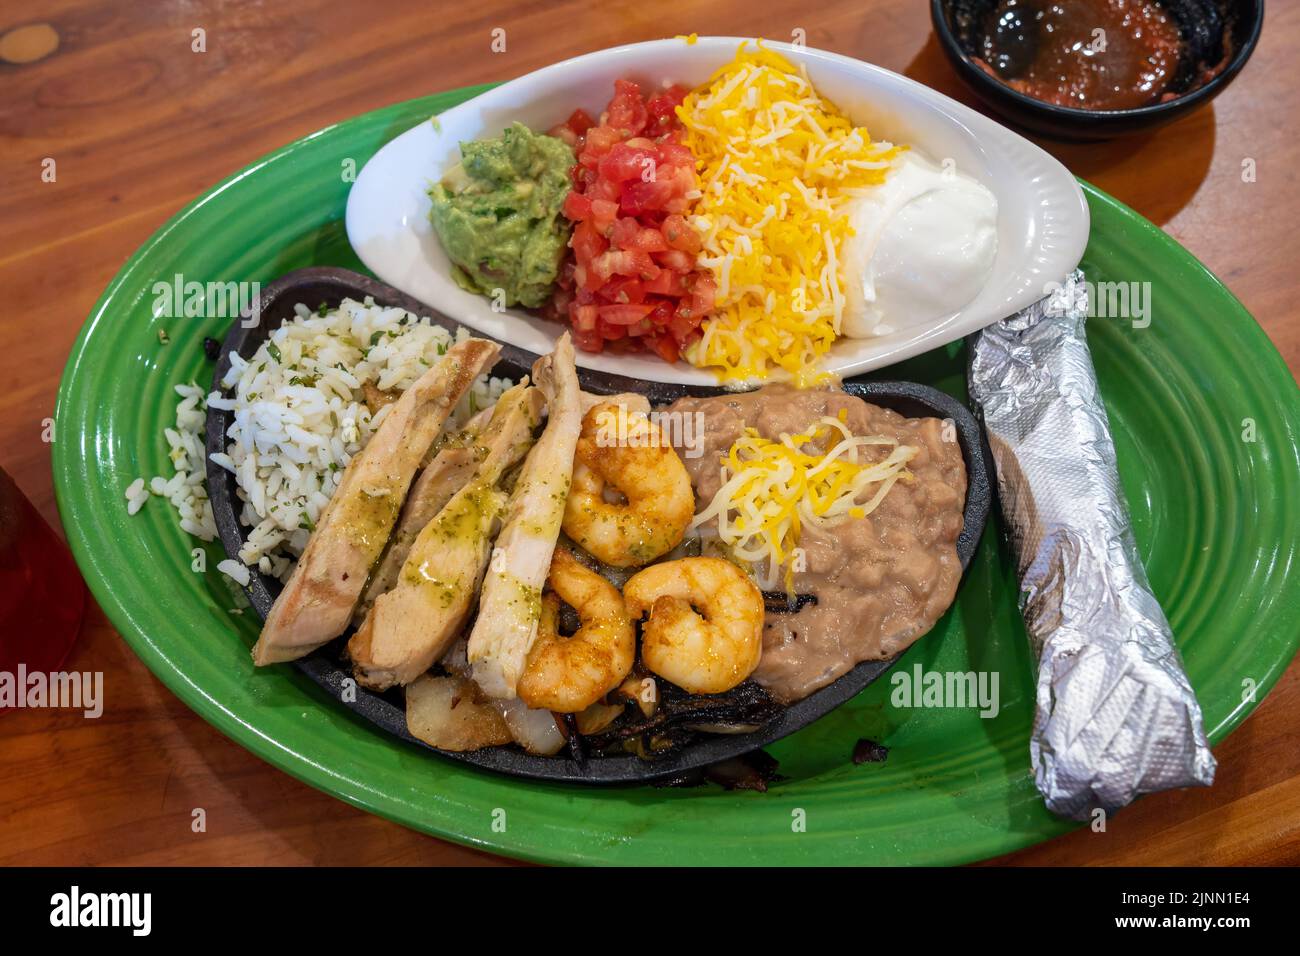 https://c8.alamy.com/comp/2JNN1E4/chicken-and-shrimp-fajitas-with-refried-beans-and-rice-and-a-foil-wrapped-tortilla-on-a-green-plate-at-a-restaurant-2JNN1E4.jpg